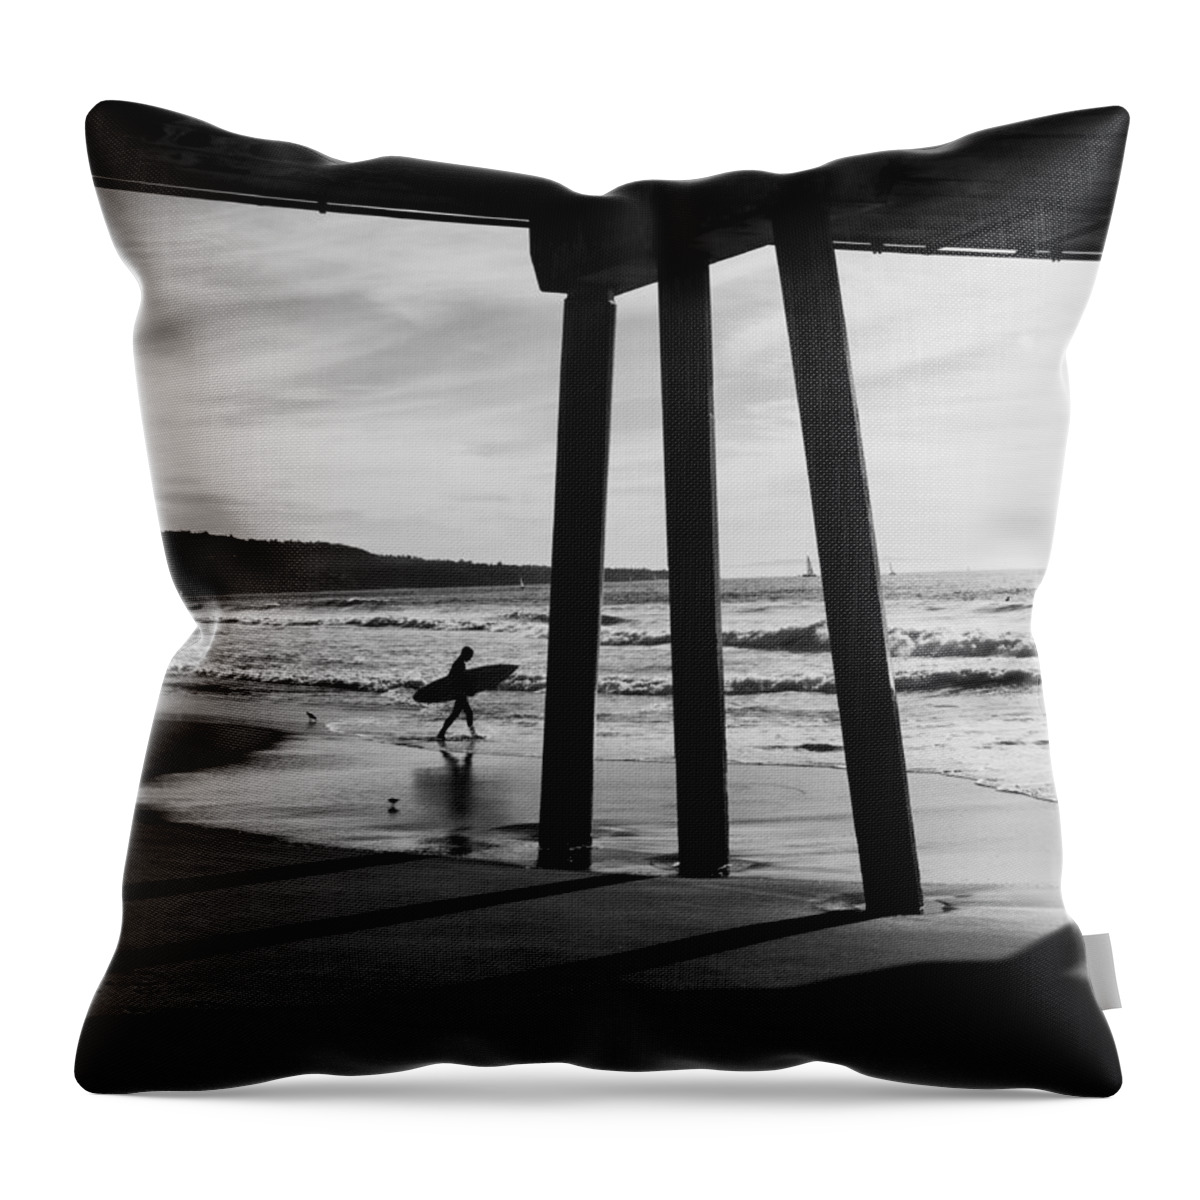 Pier Throw Pillow featuring the photograph Hermosa Surfer Under Pier by Michael Hope